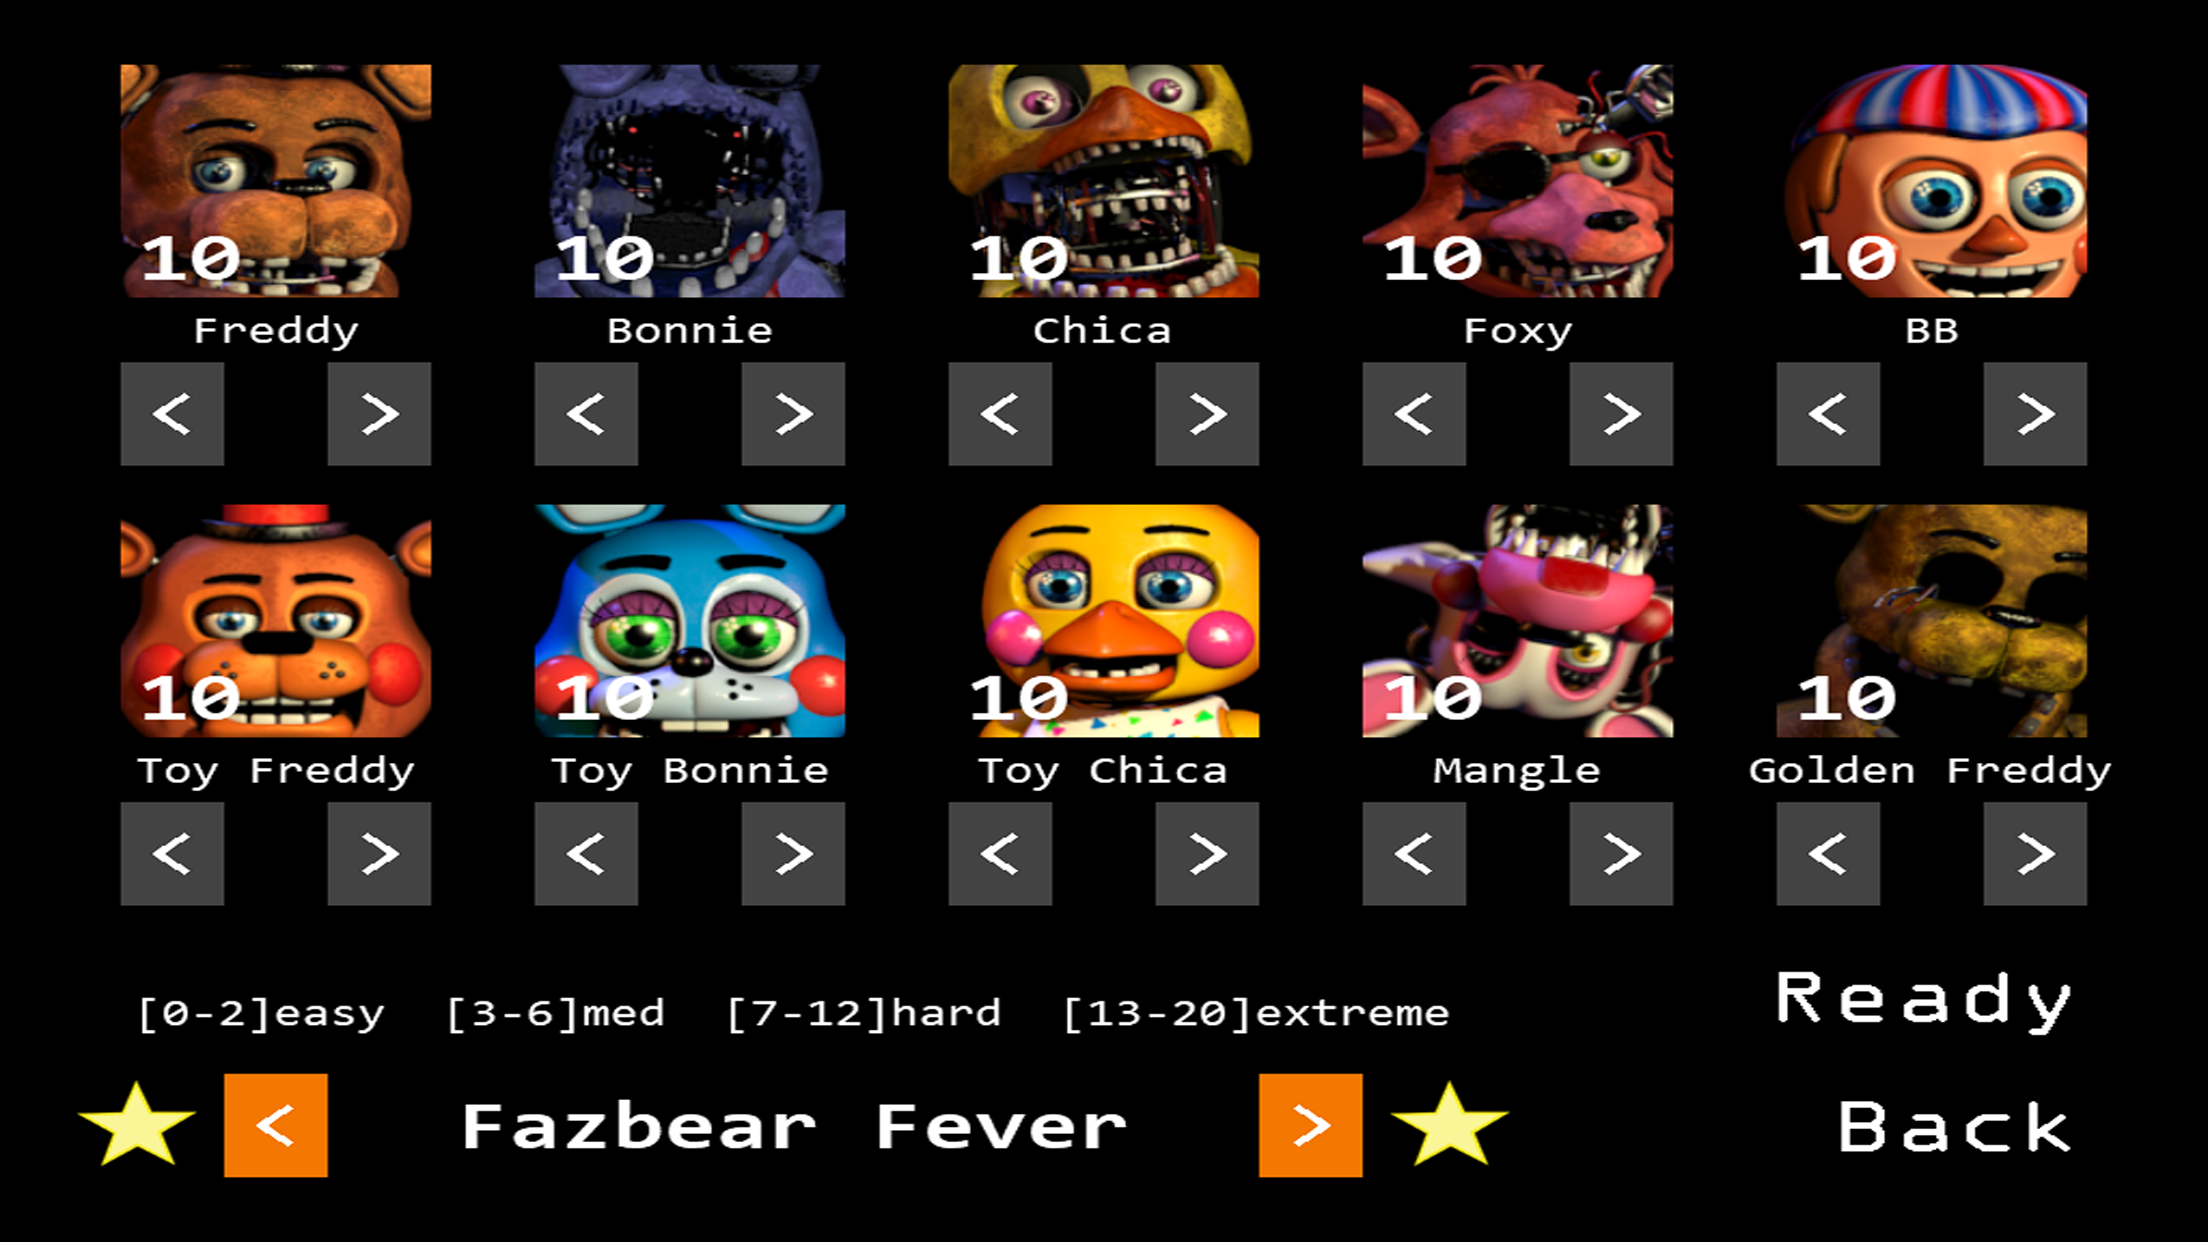 FIVE NIGHTS AT FREDDY'S 2 free online game on